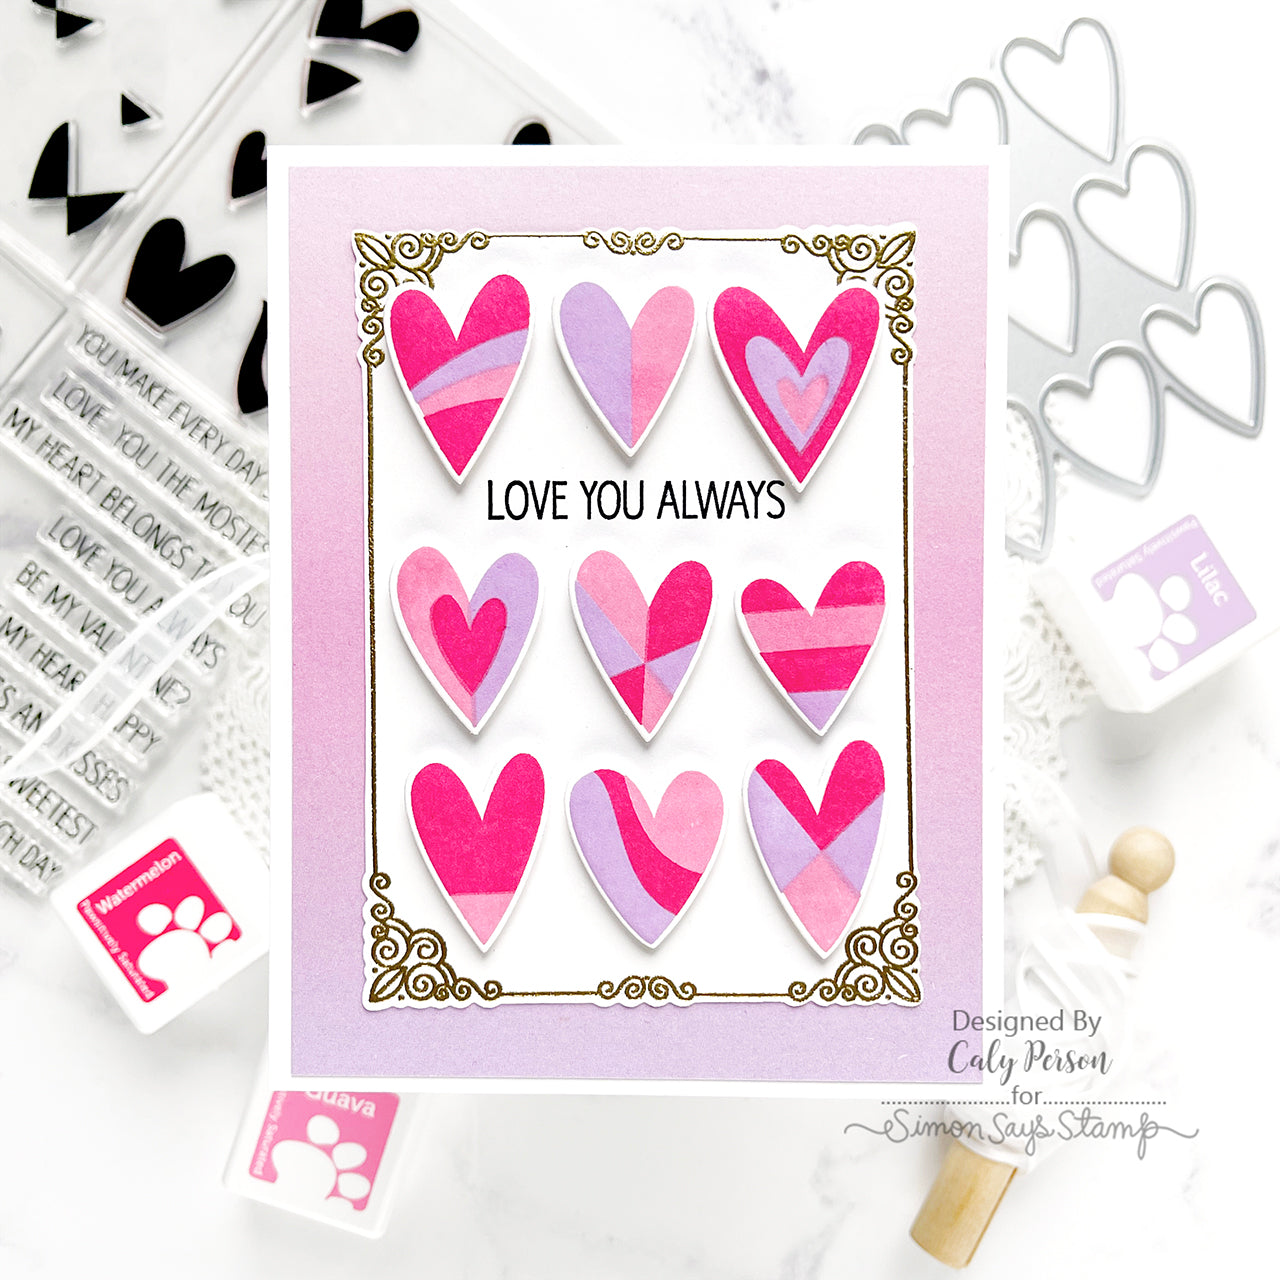 Simon Says Stamp Streaming Heart Wafer Dies S530 Love | Simon Says Wafer Dies | Crafting & Stamping Supplies from Simon Says Stamp